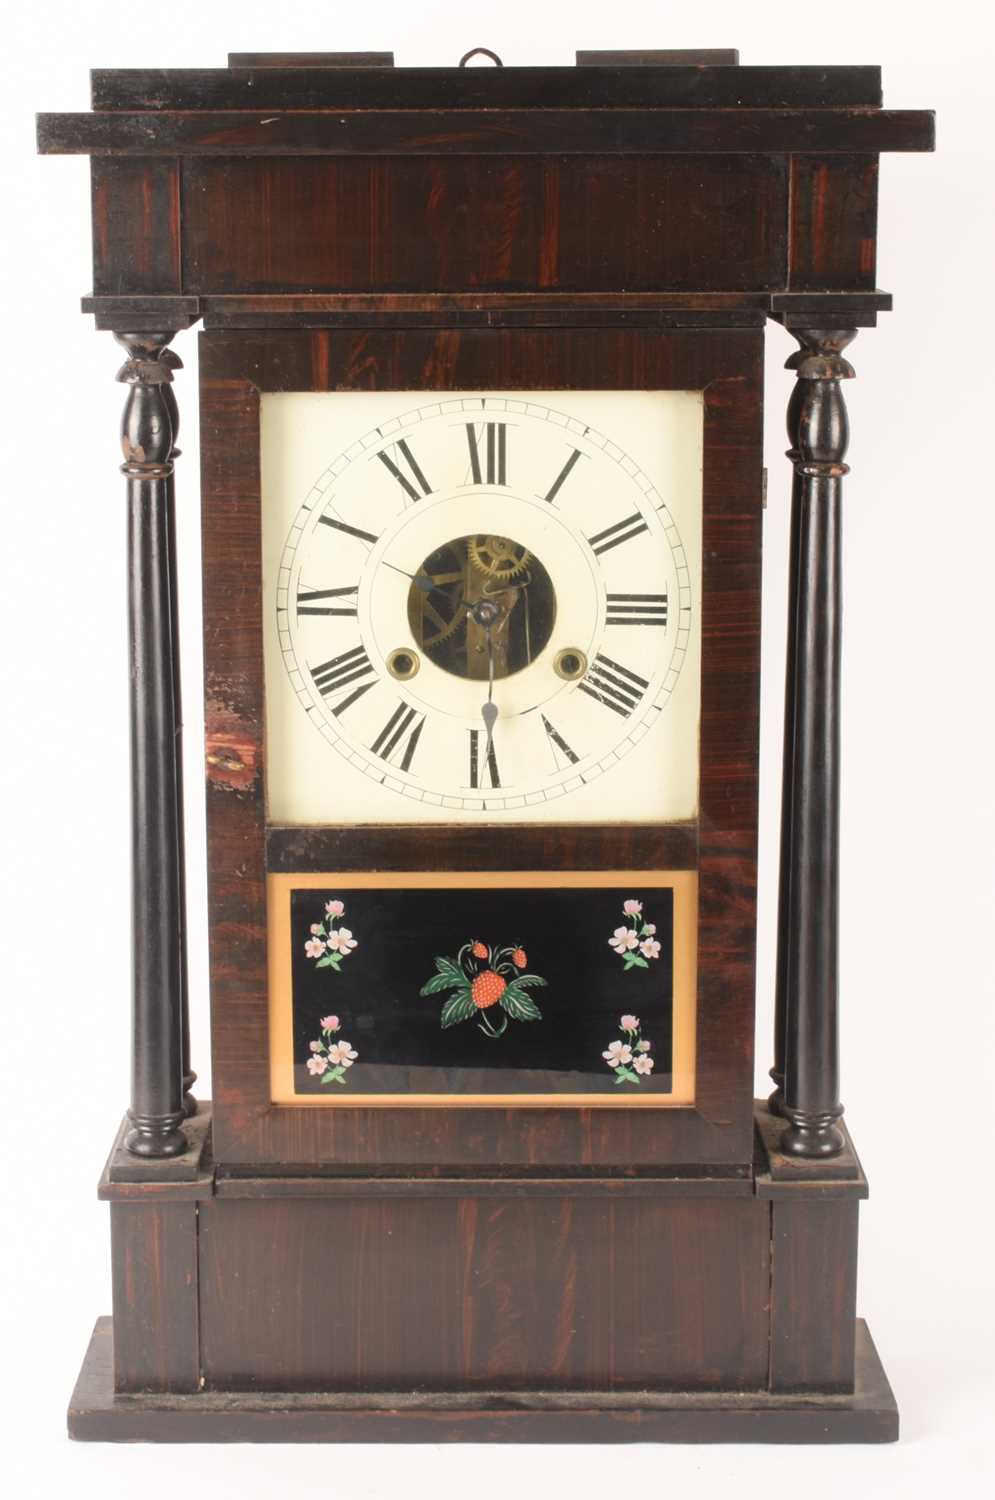 A 19th-century Chauncy Jerome 'New York Style' four-columned wall clock, 40.5 cm wide x 12 cm deep x